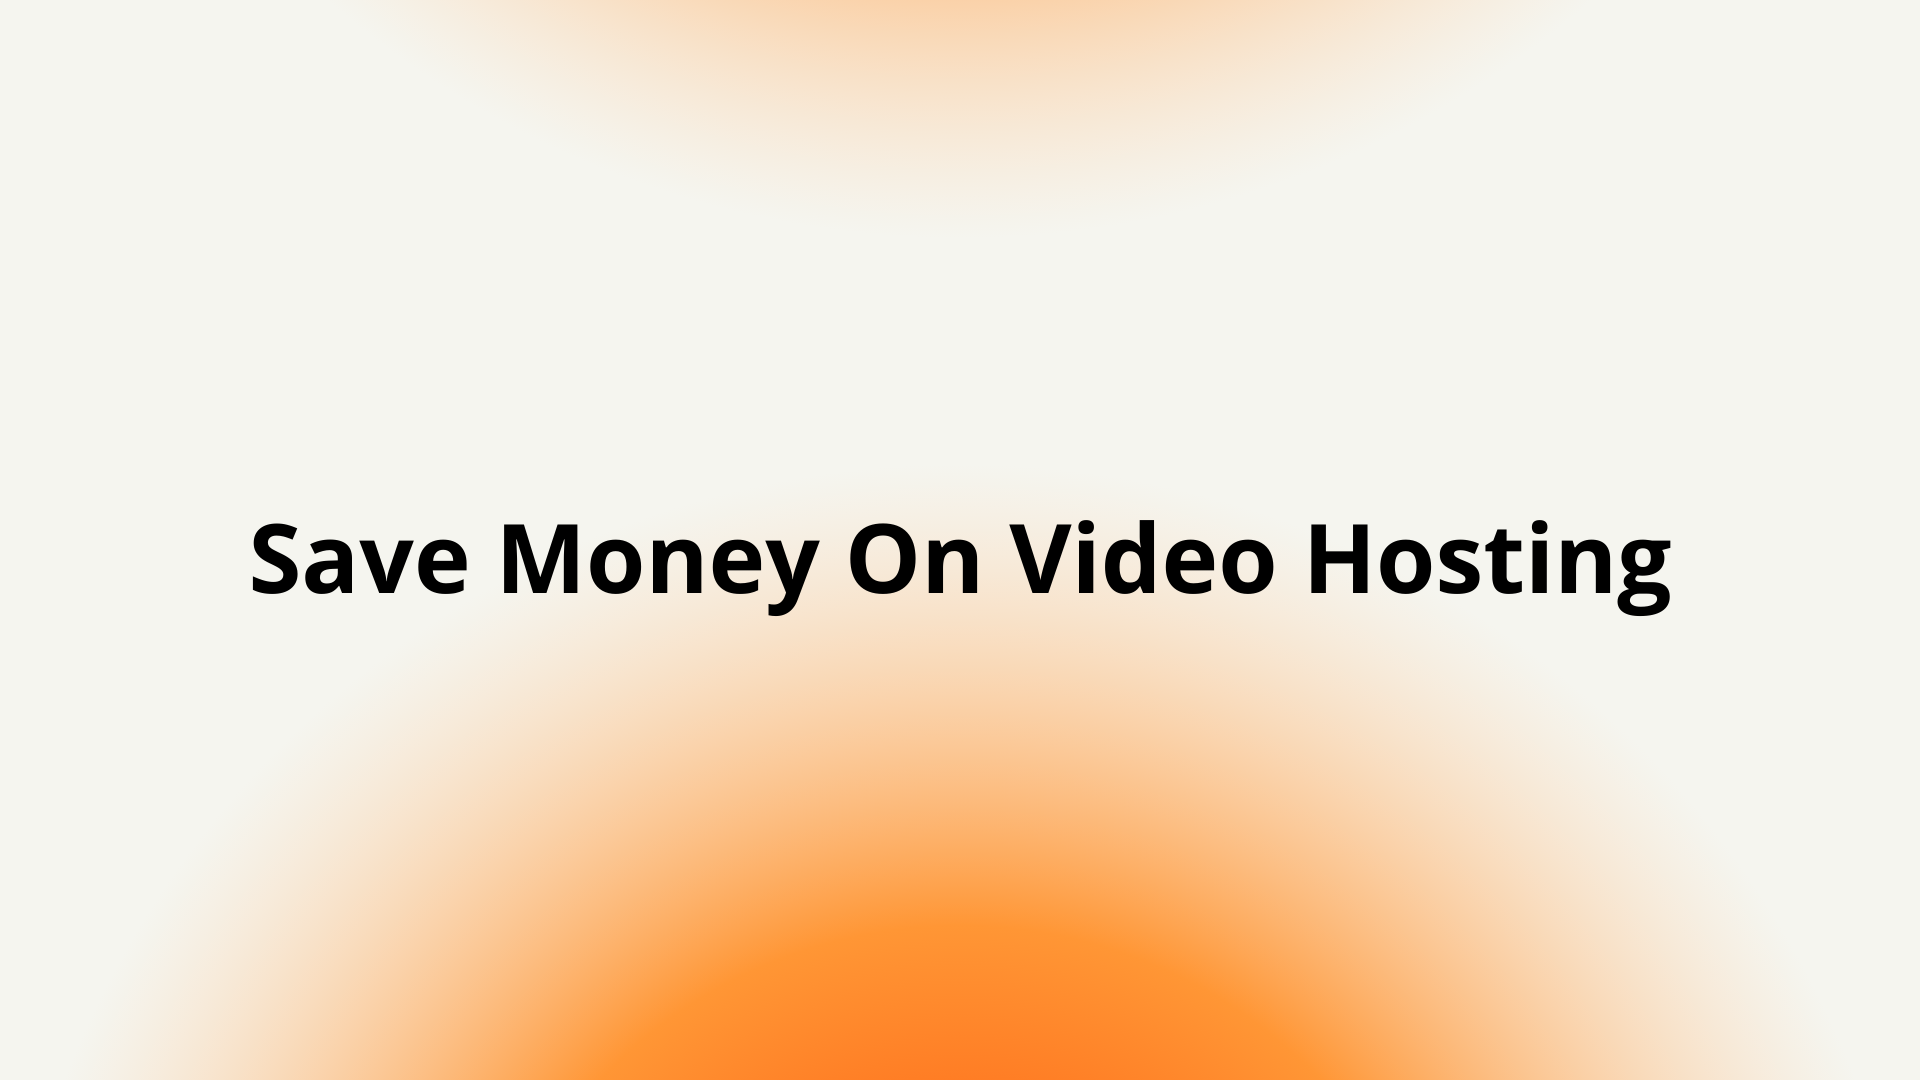 Inexpensive video hosting services that's way cheaper than the competition